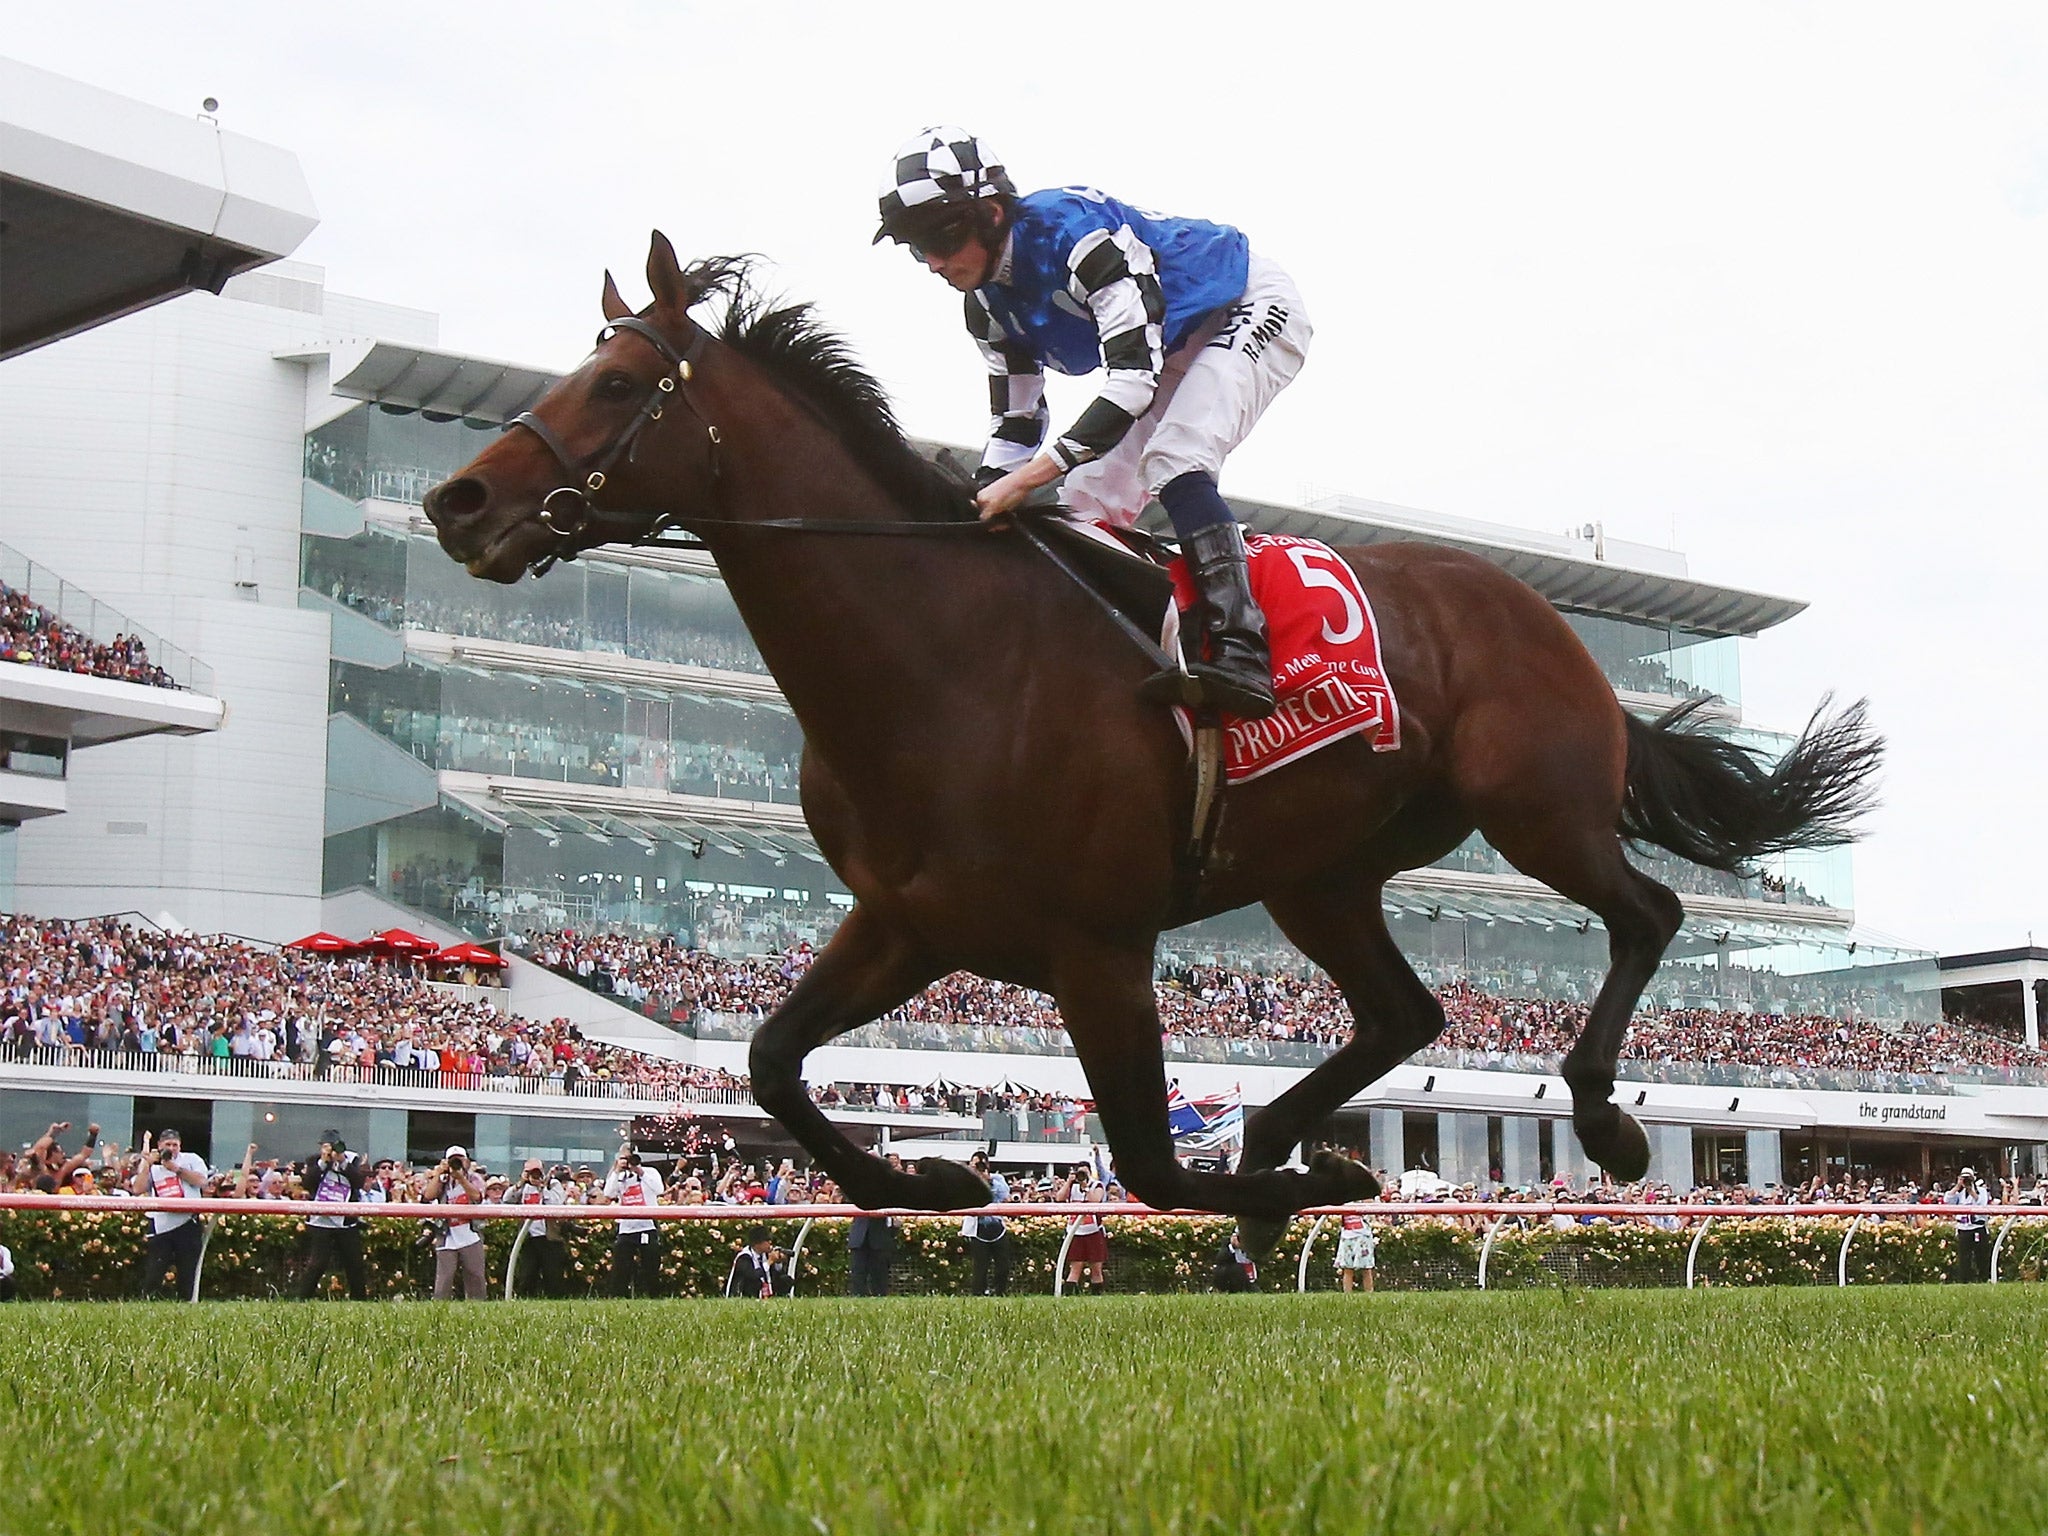 Protectionist wins the Melbourne Cup, the first German horse to triumph in one of the world’s most prestigious races